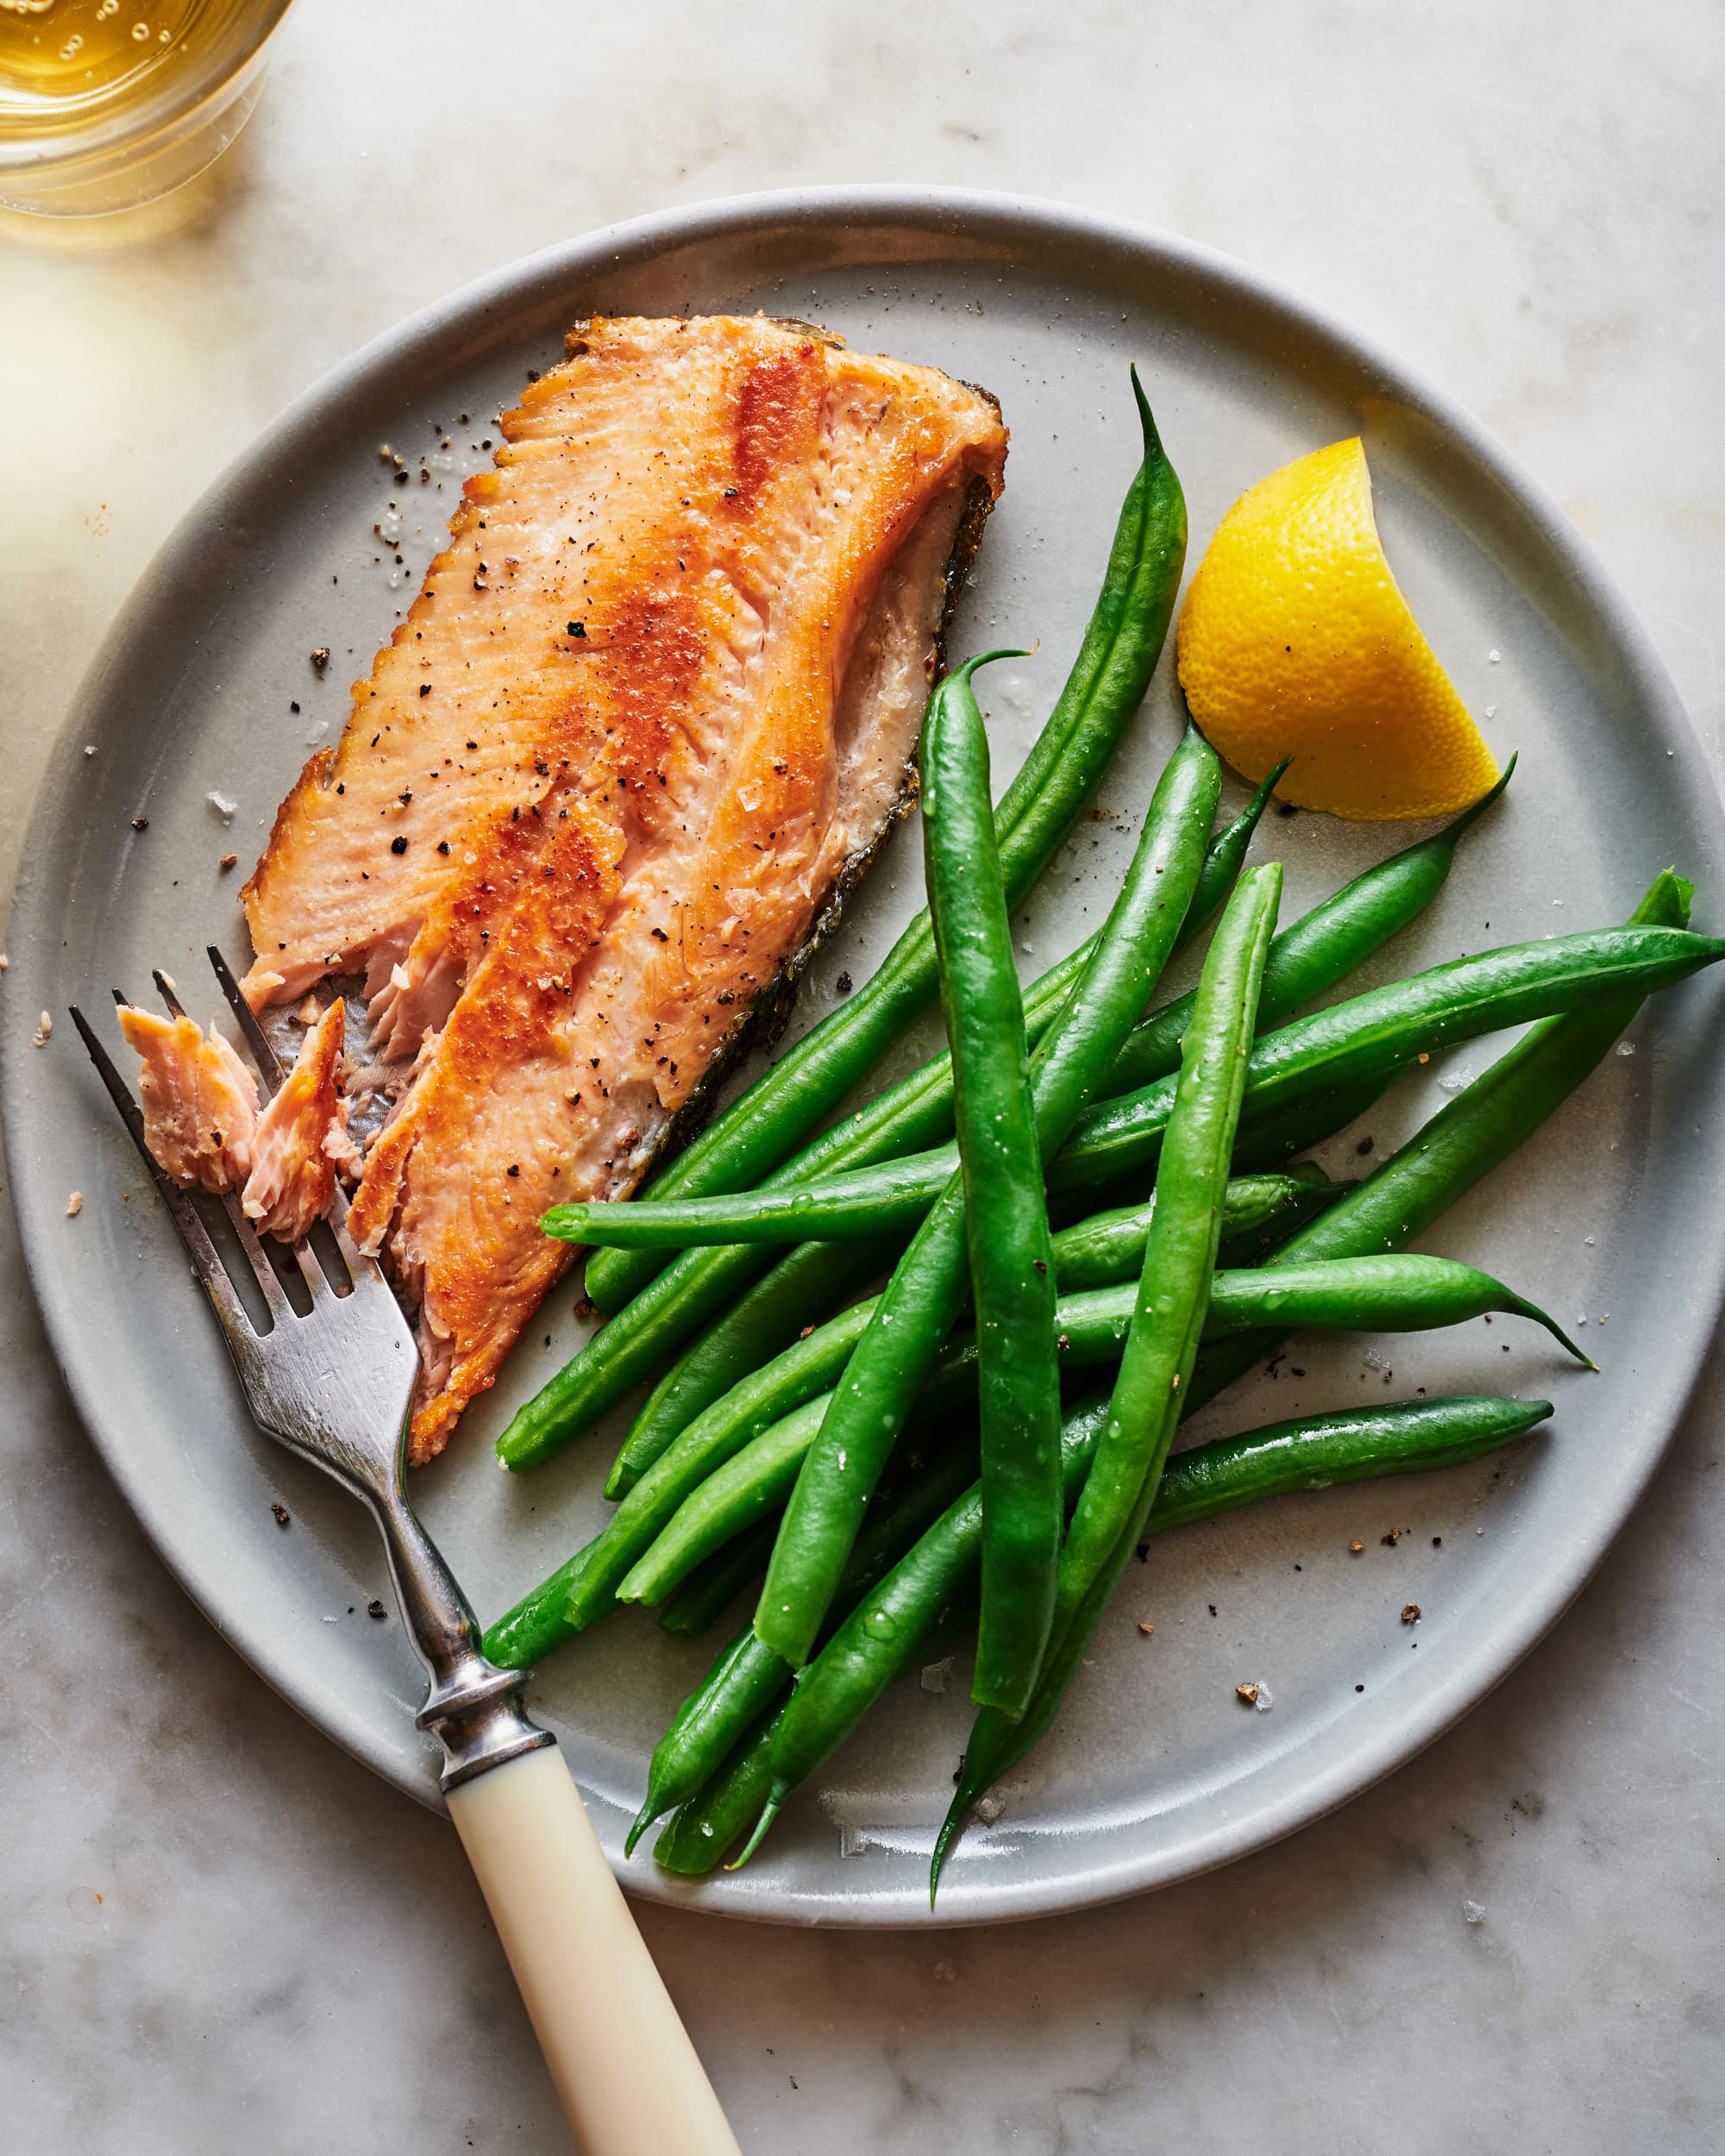 Pan Fried Rainbow Trout Fillet Recipe | Bryont Blog